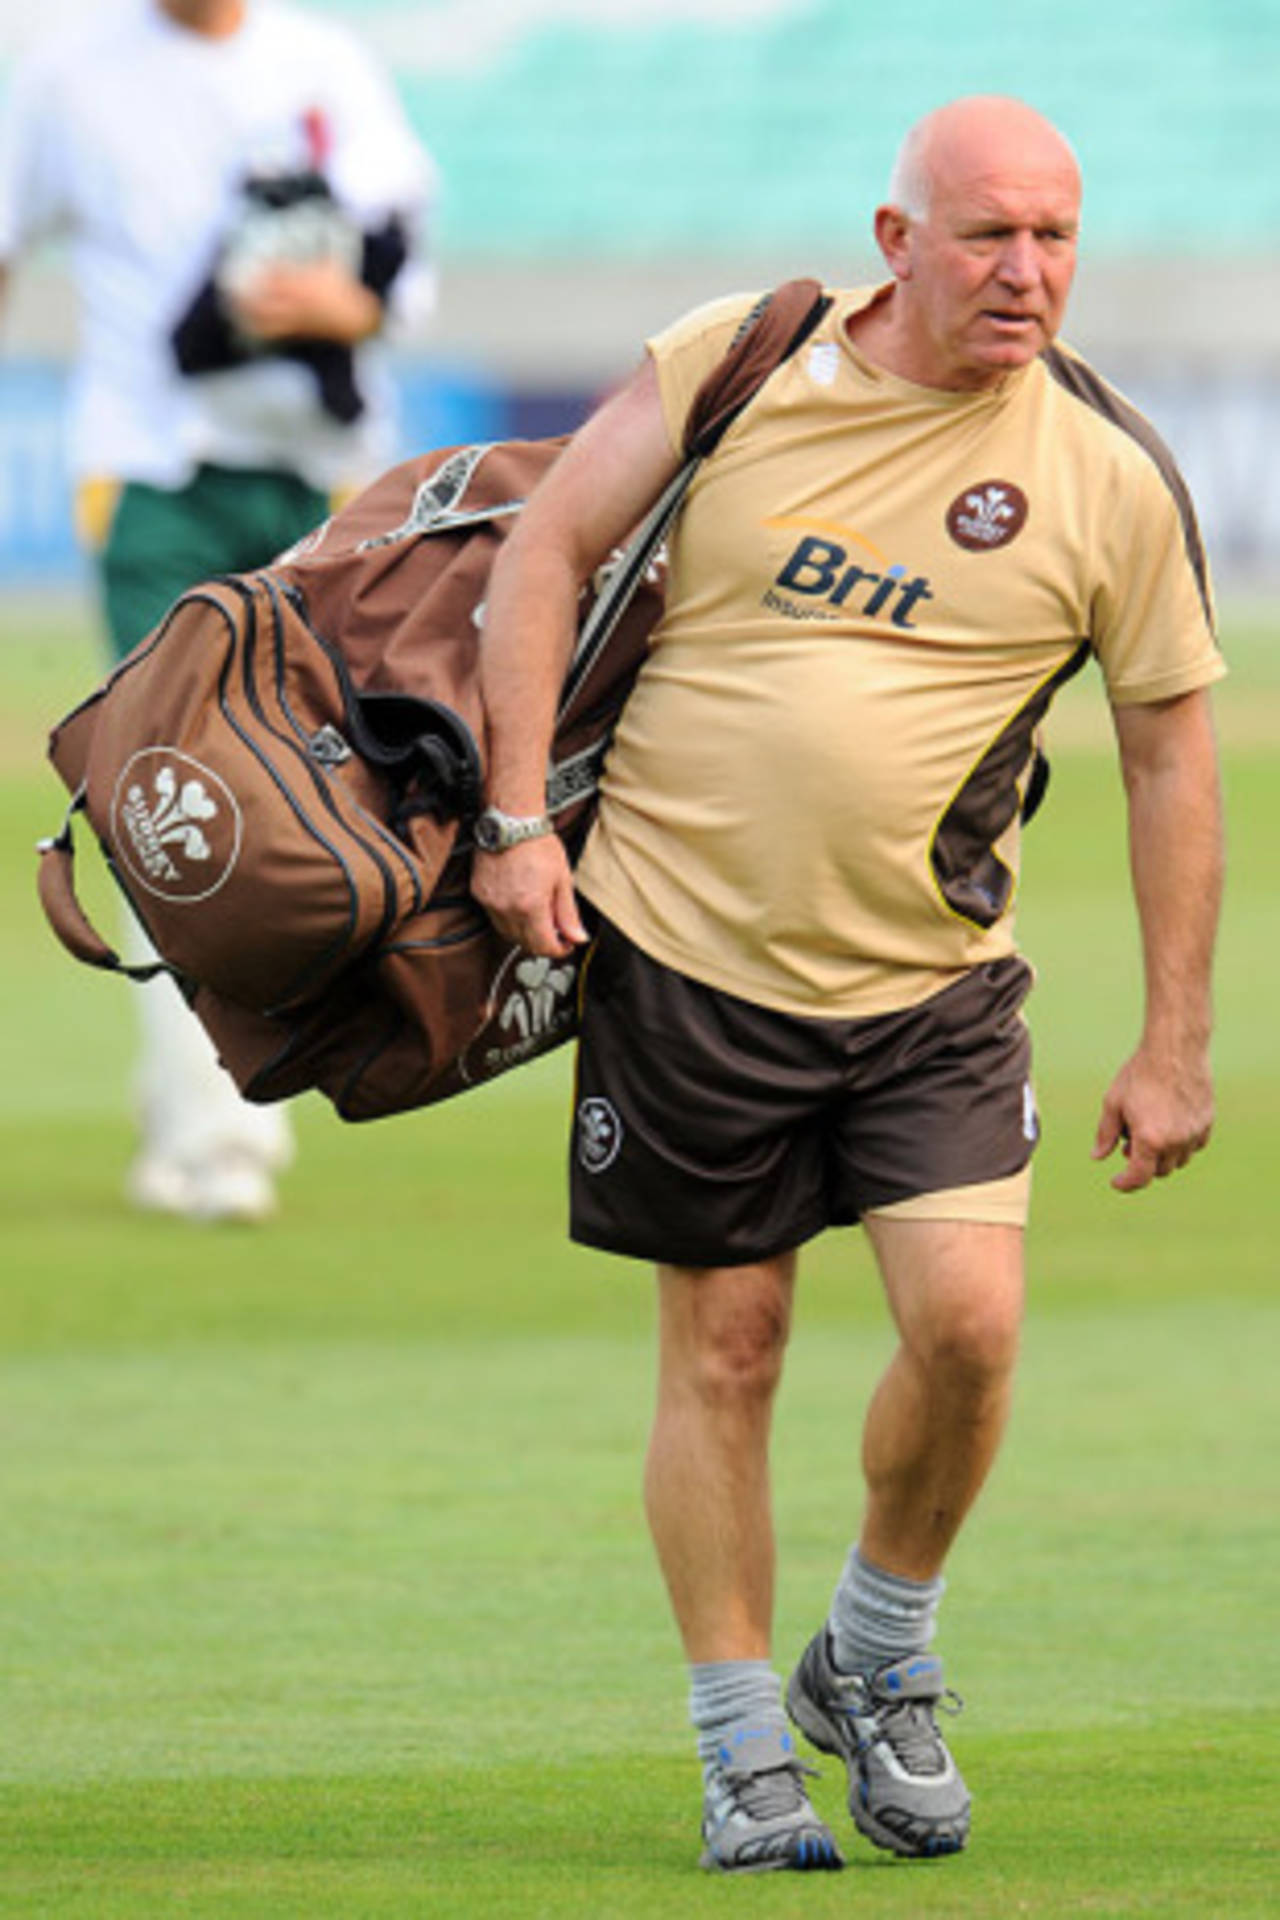 Surrey's coach Alan Butcher leaves the field of play with a kit bag on his shoulder, The Oval, September 17, 2008